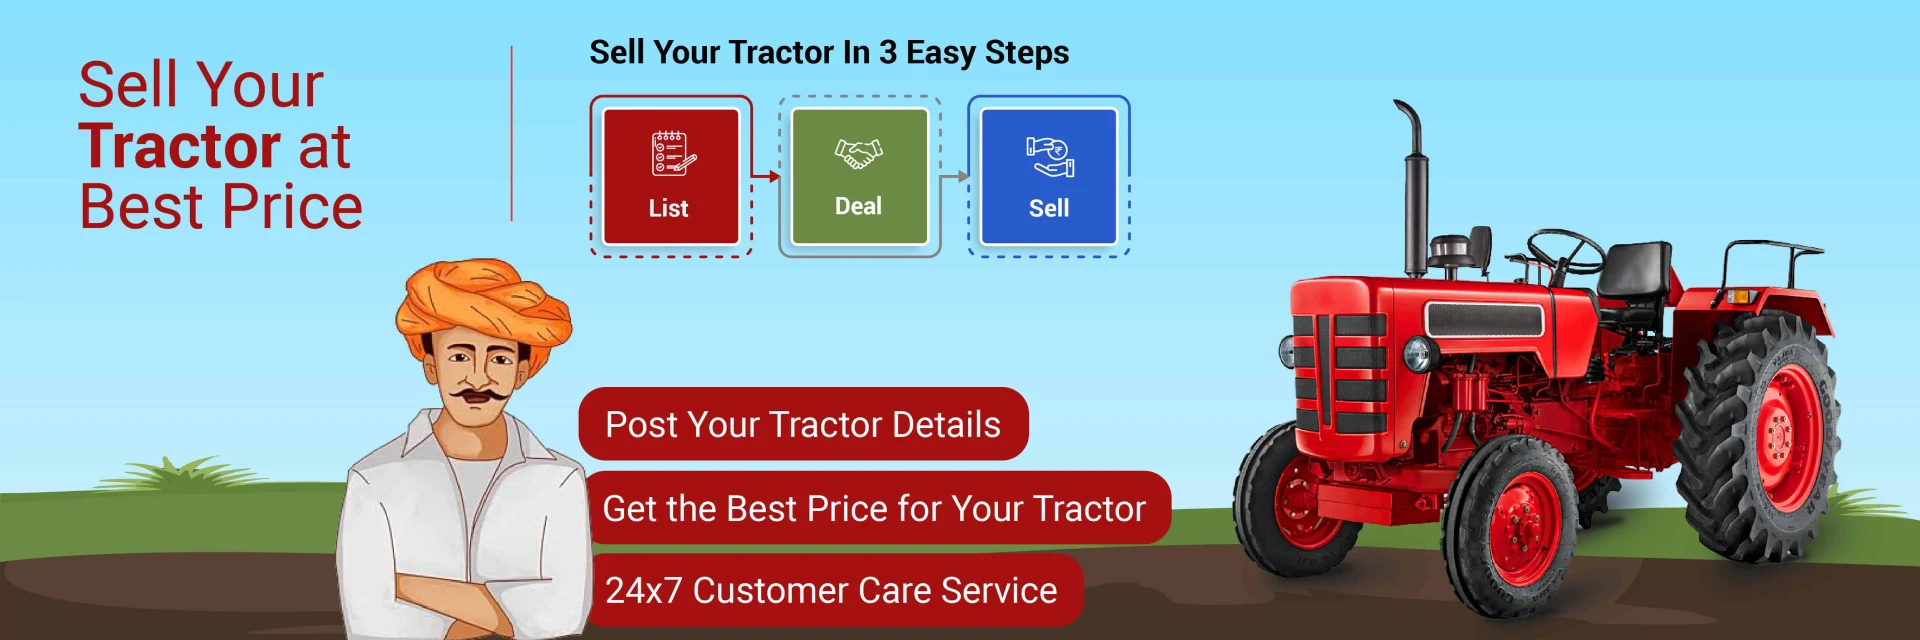 Sell Your Tractor At Best Price